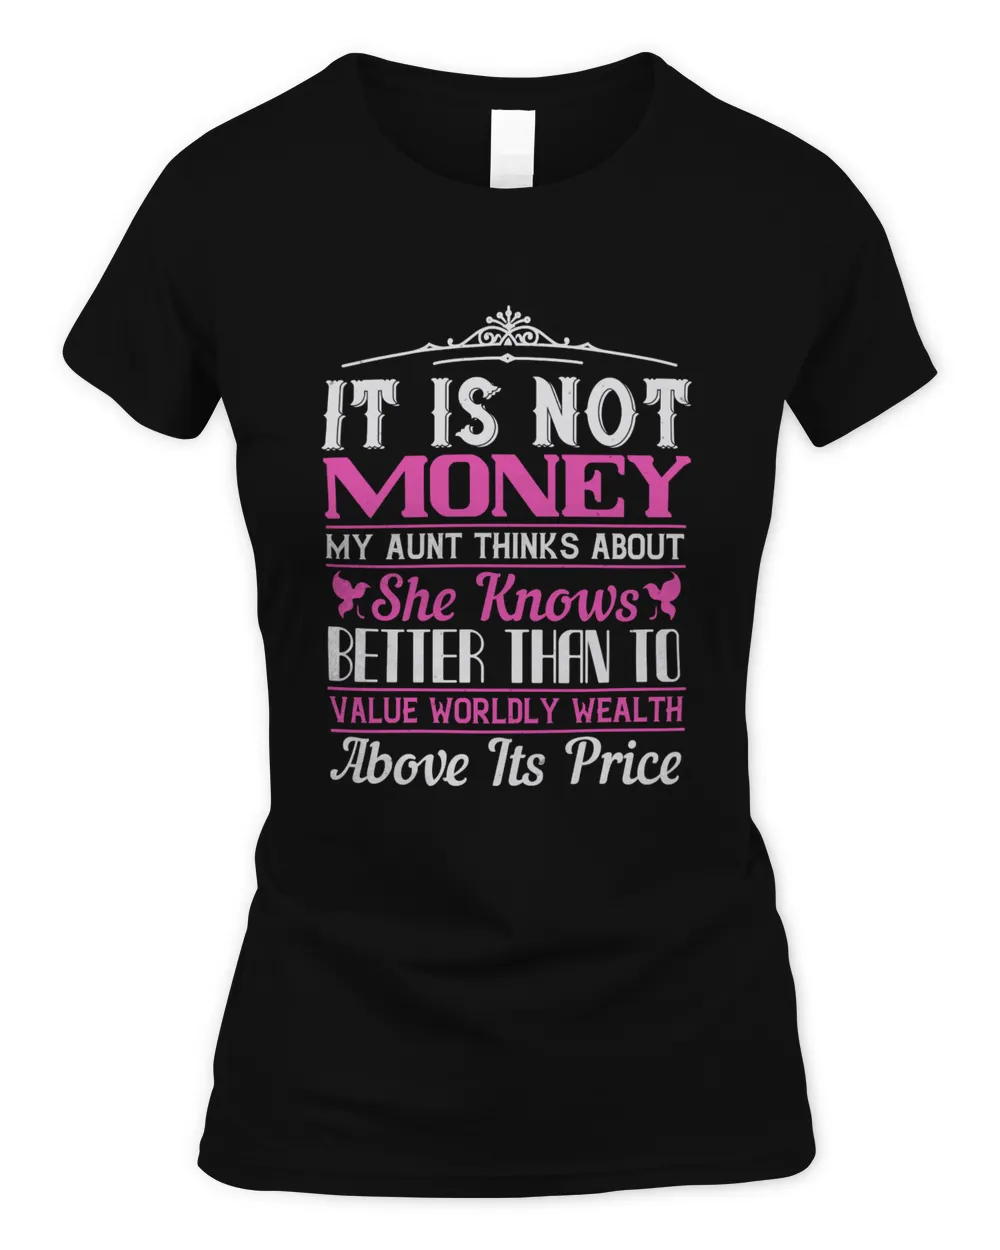 It Is Not Money My Aunt Thinks About. She Knows Better Than To Value Worldly Wealth Above Its Price